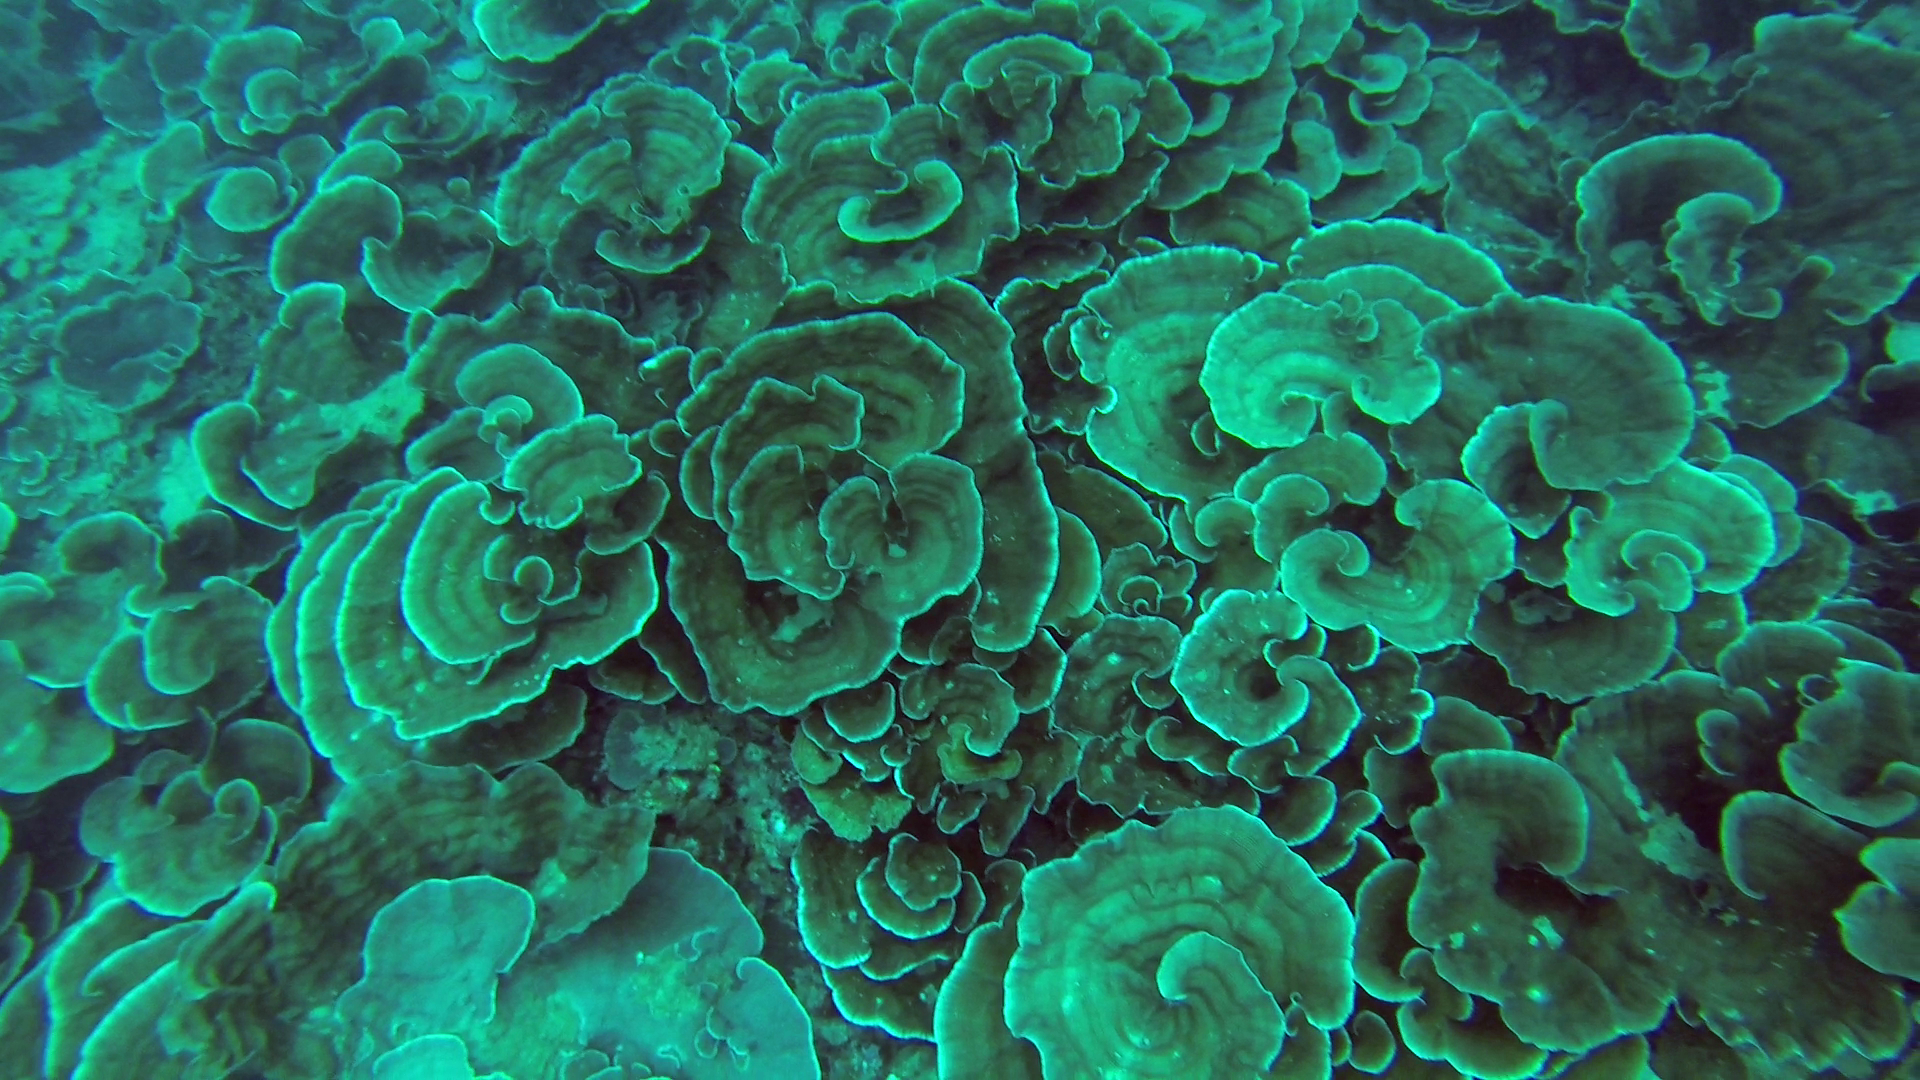 2. Coral Reef Ecology